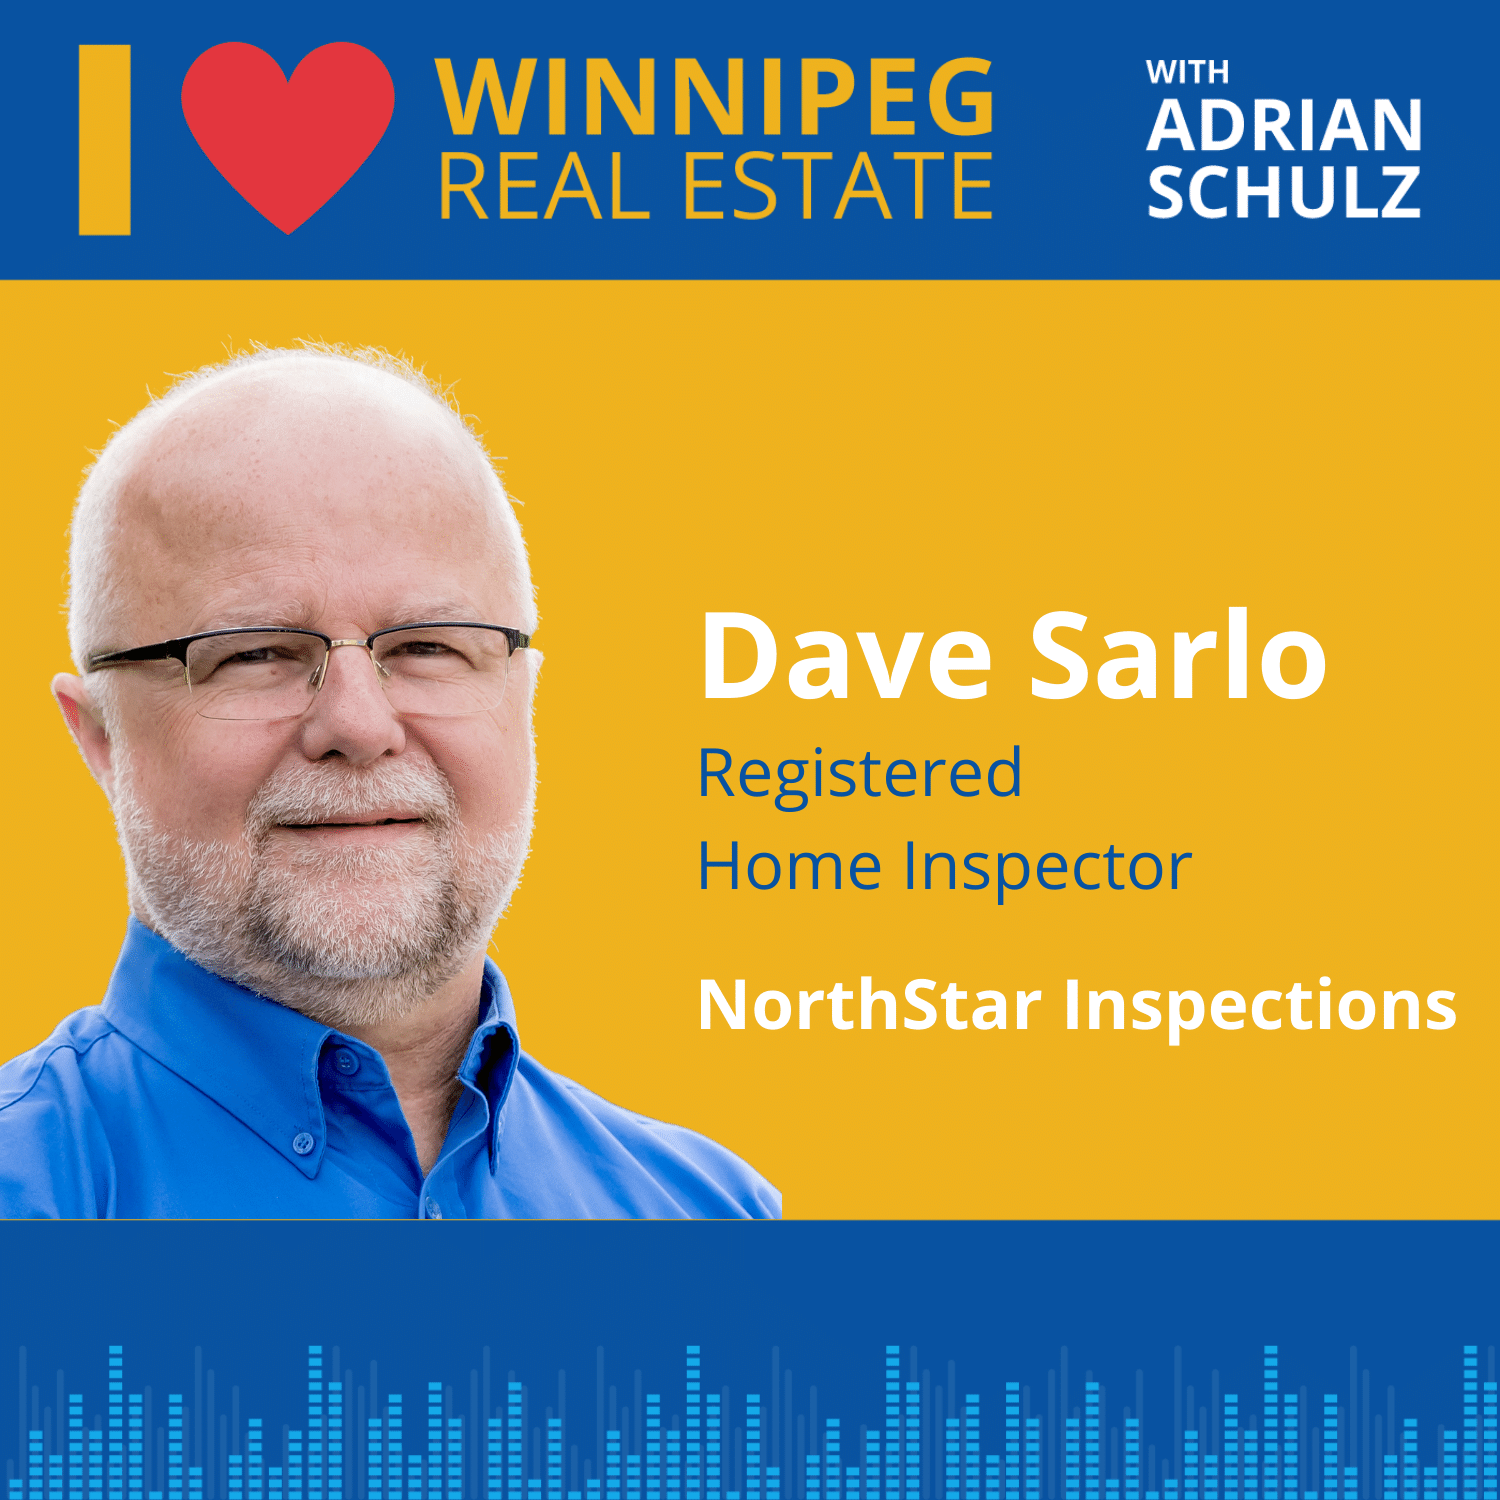 Dave Sarlo on home inspections in Winnipeg